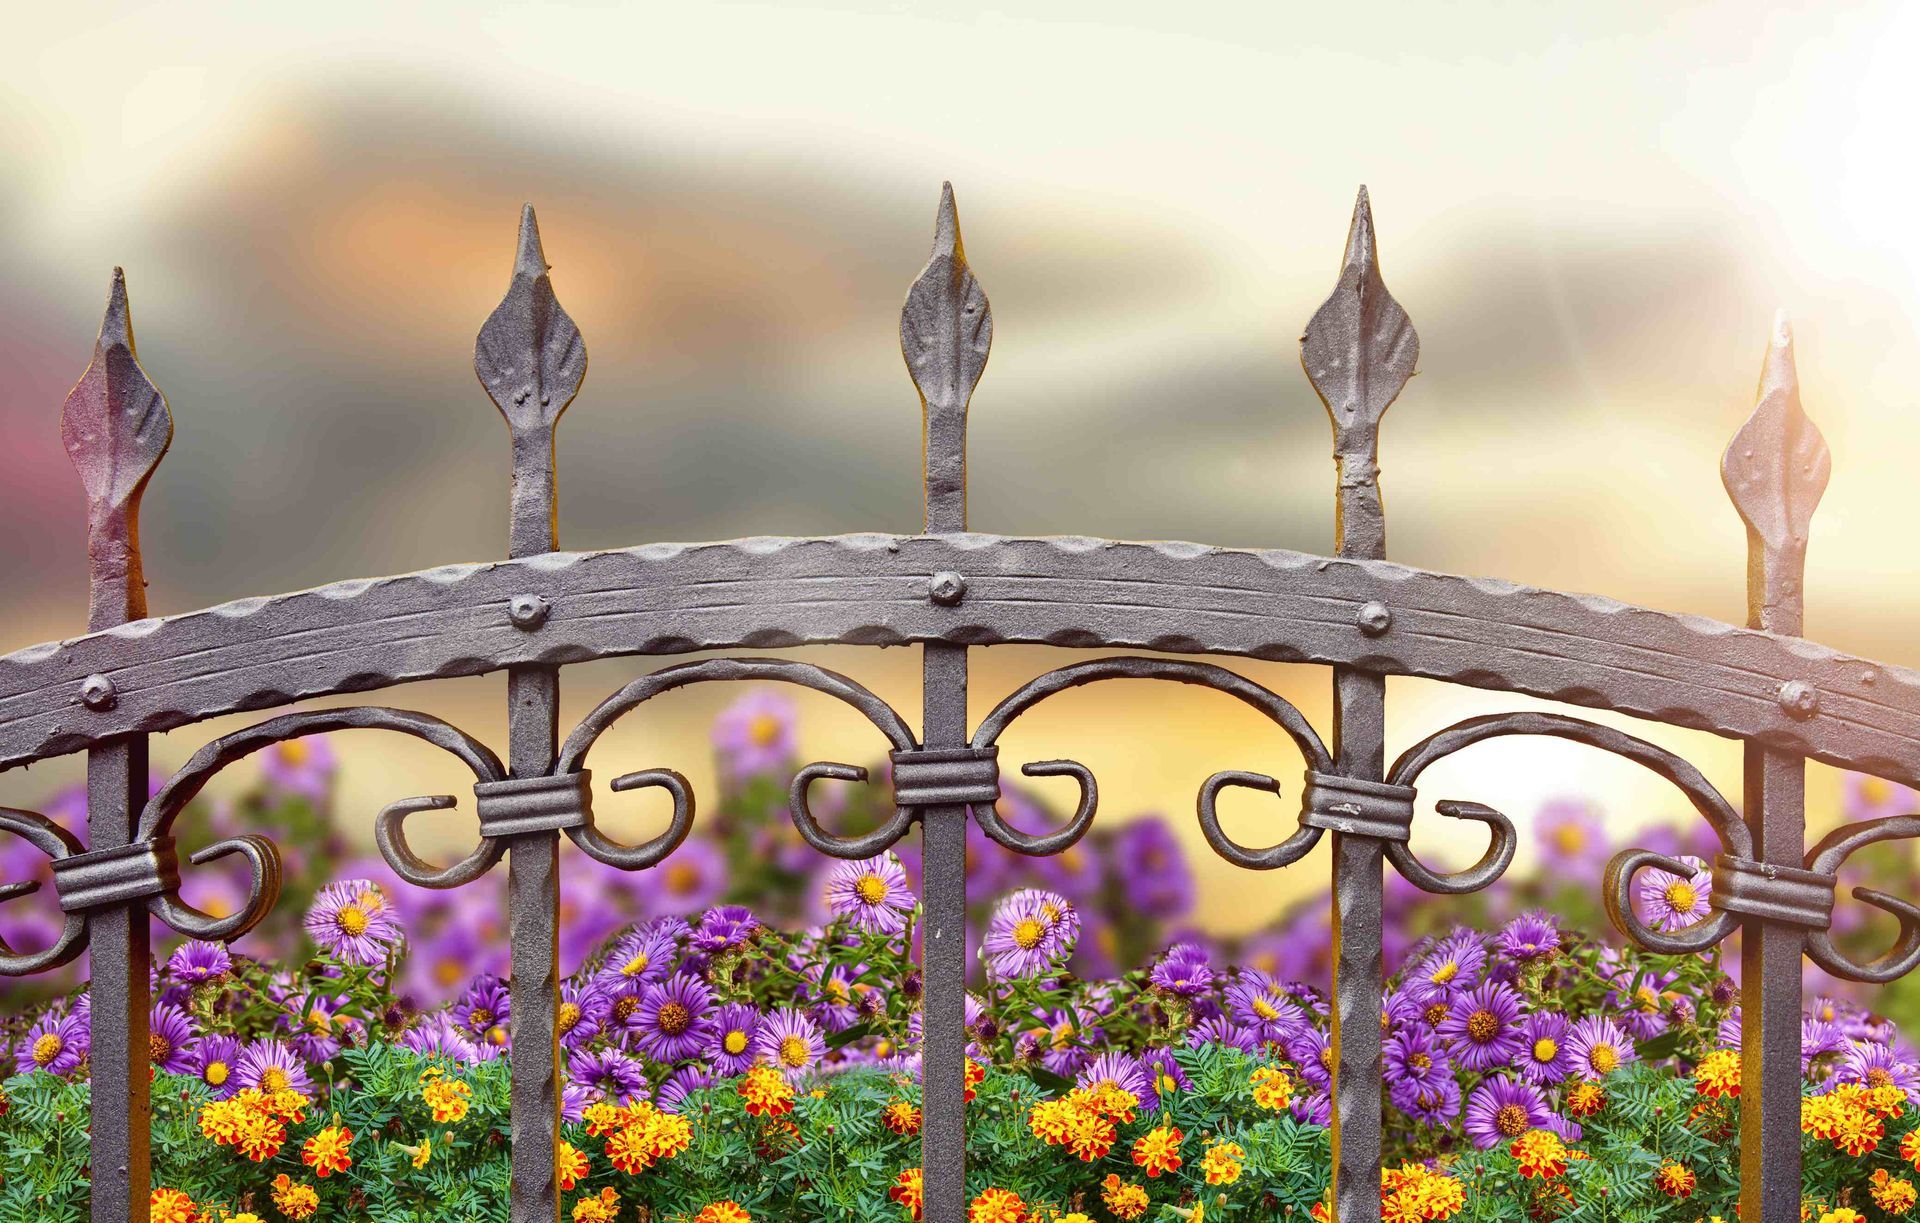 Iron fence top by purple flowers